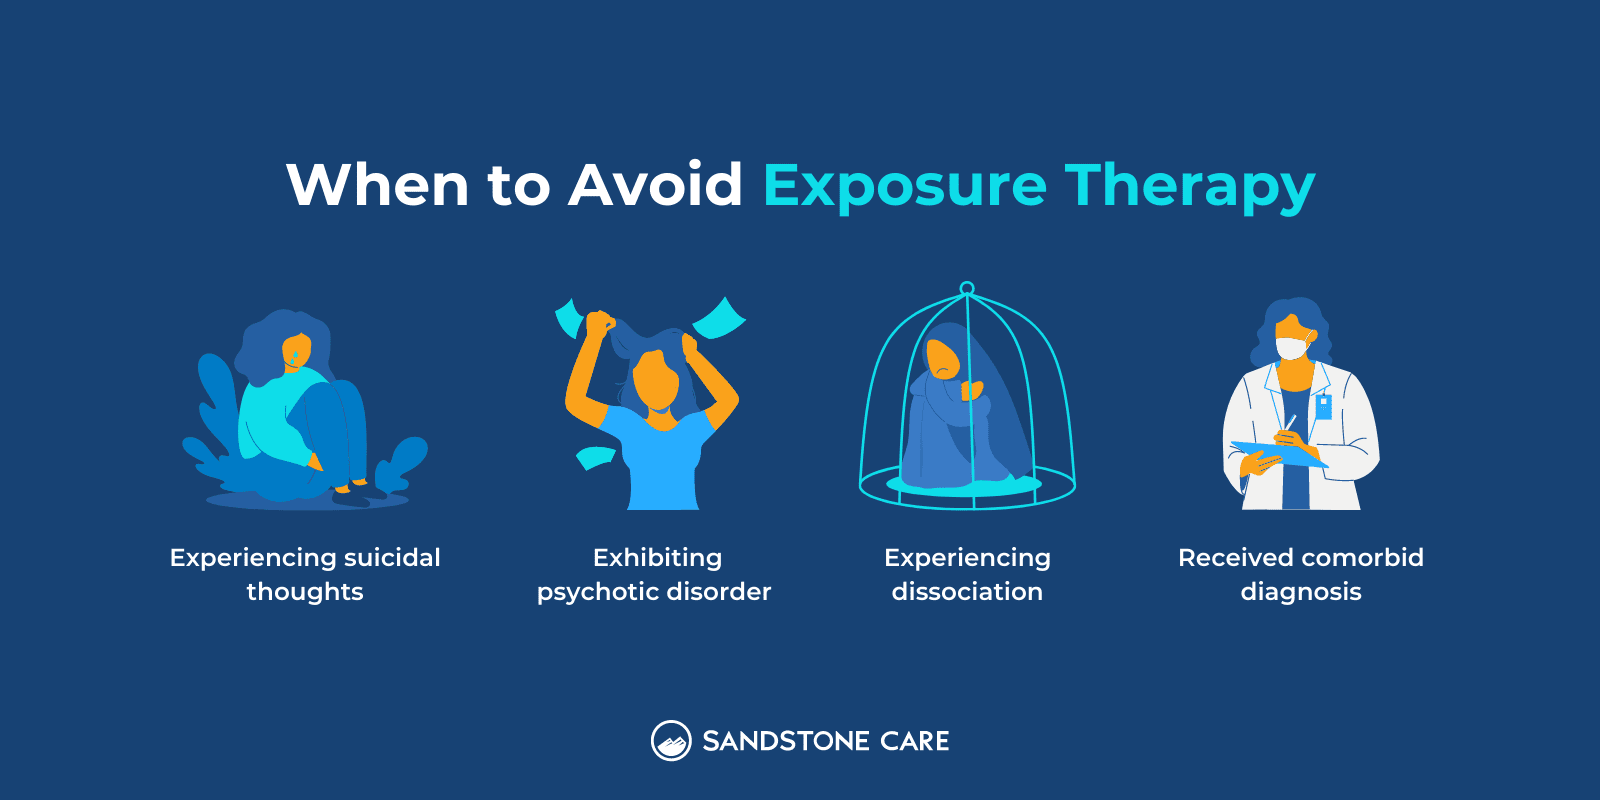 When to avoid exposure therapy illustrated with relevant graphics